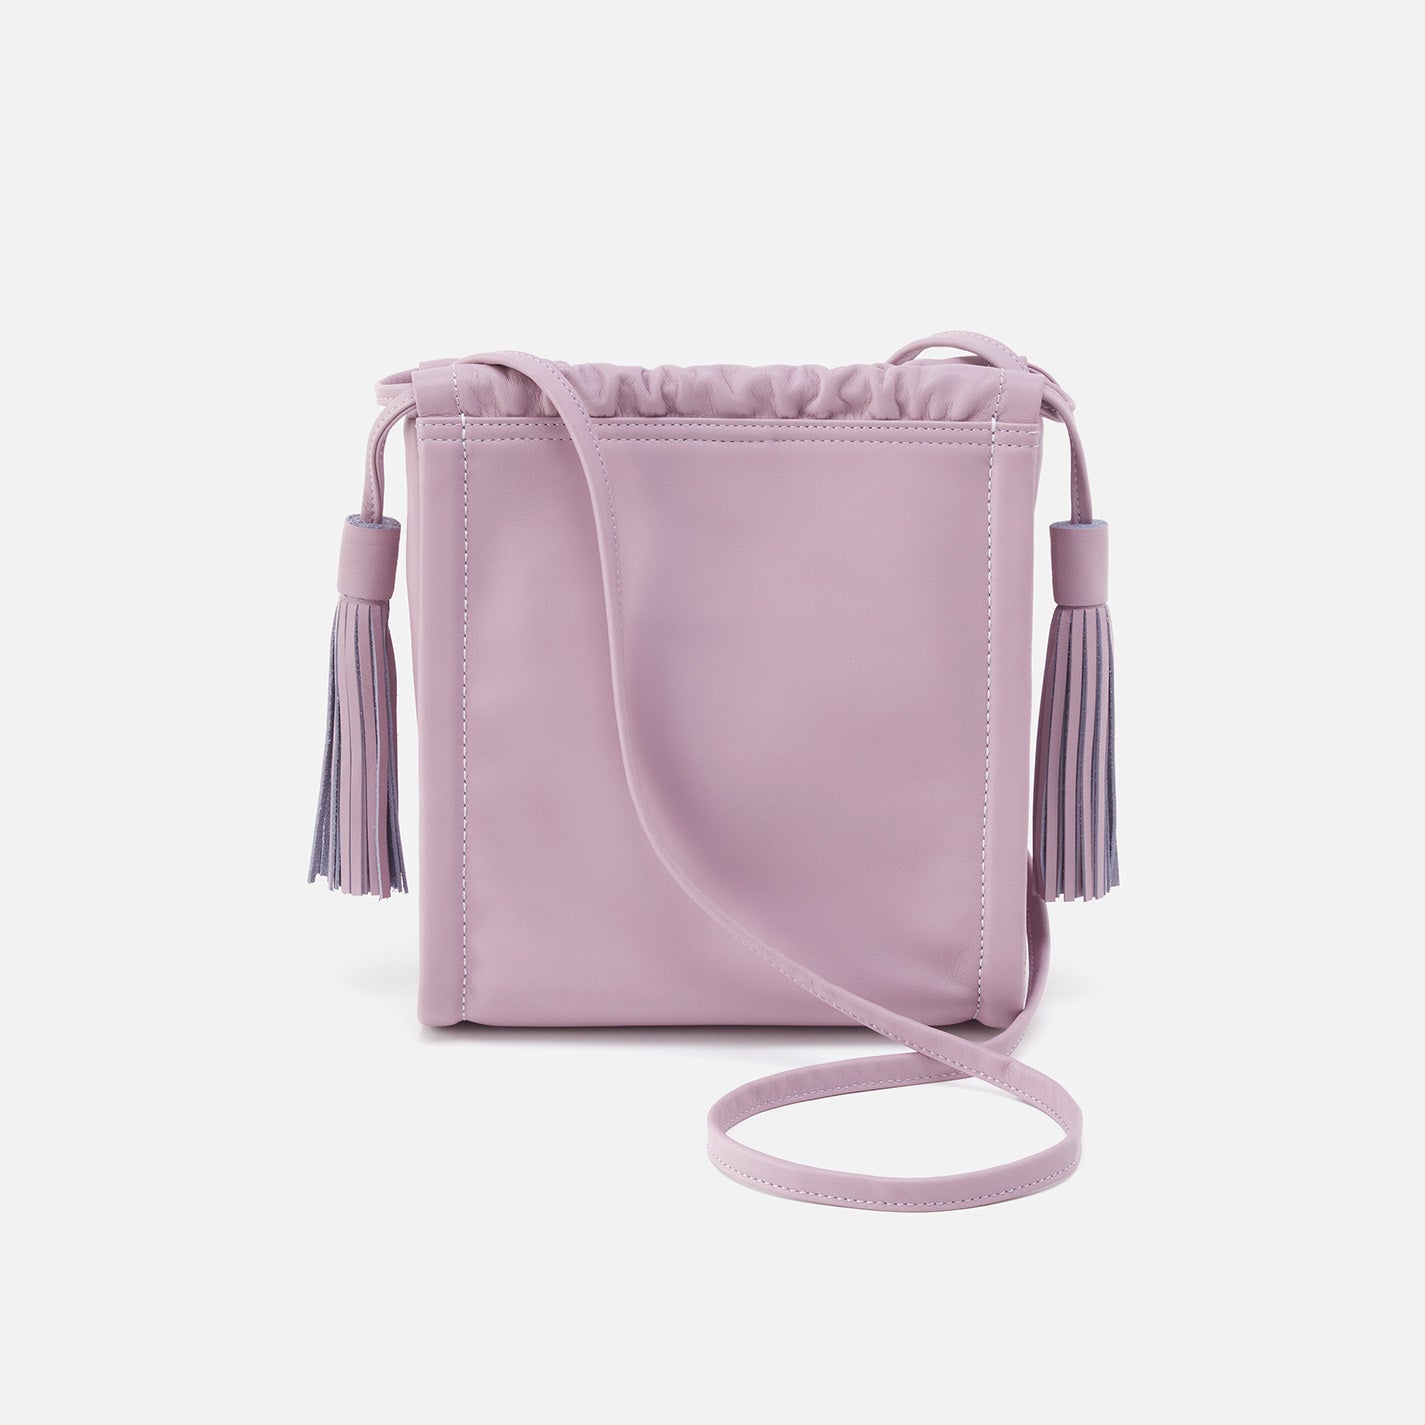 Introducing Sheila a small crossbody bag designed with our